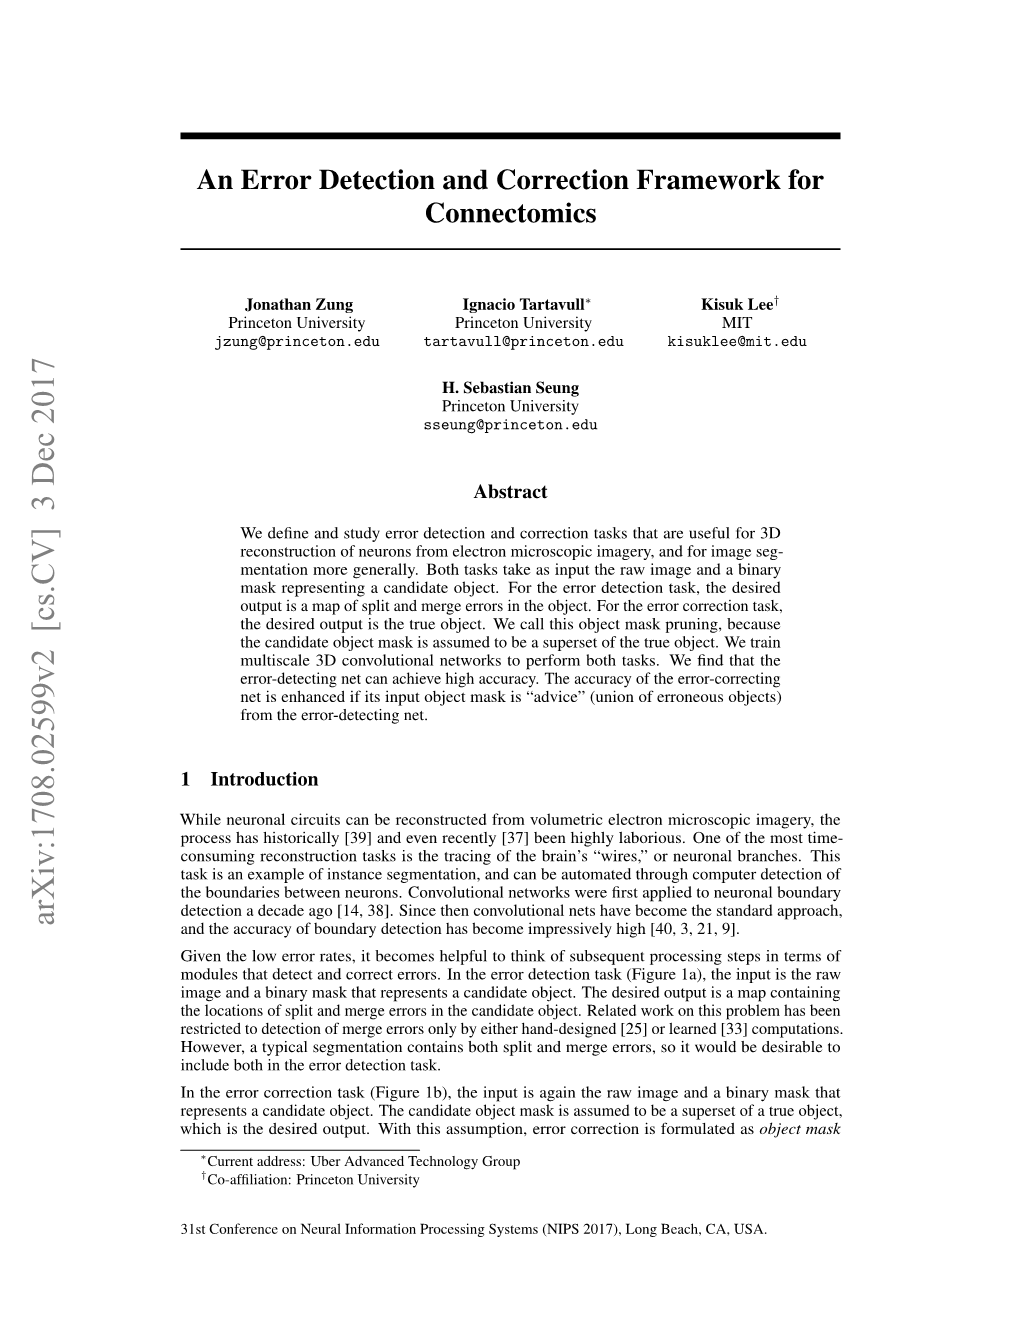 An Error Detection and Correction Framework for Connectomics